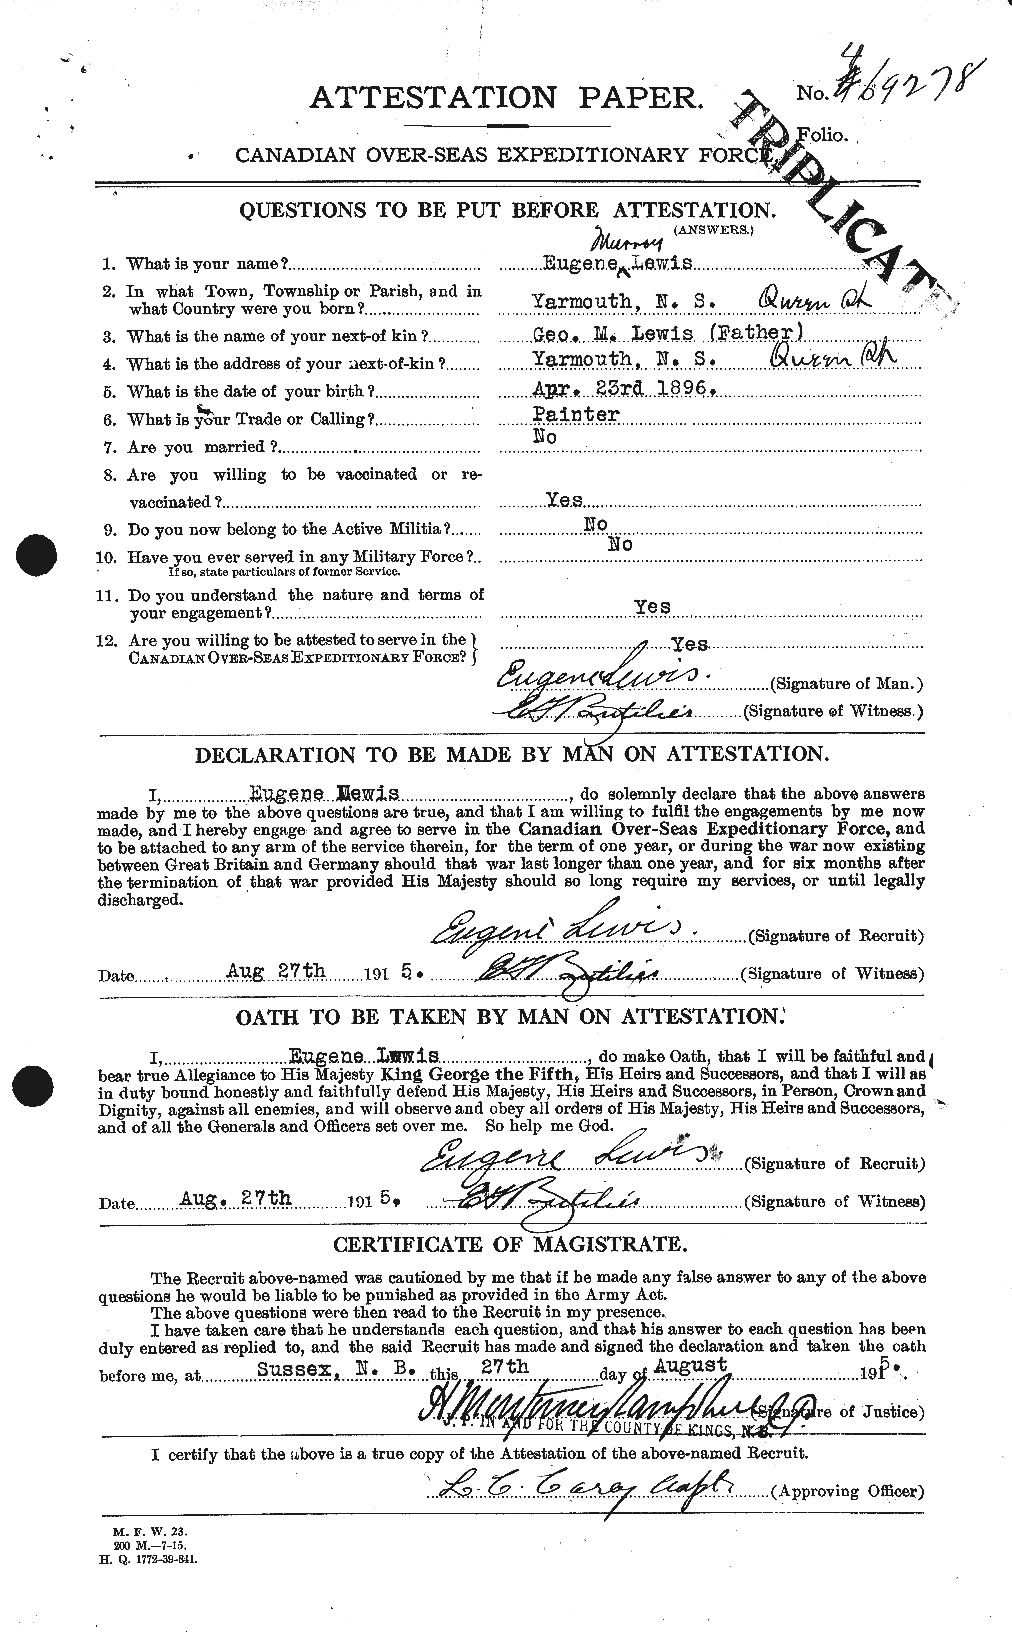 Personnel Records of the First World War - CEF 465037a